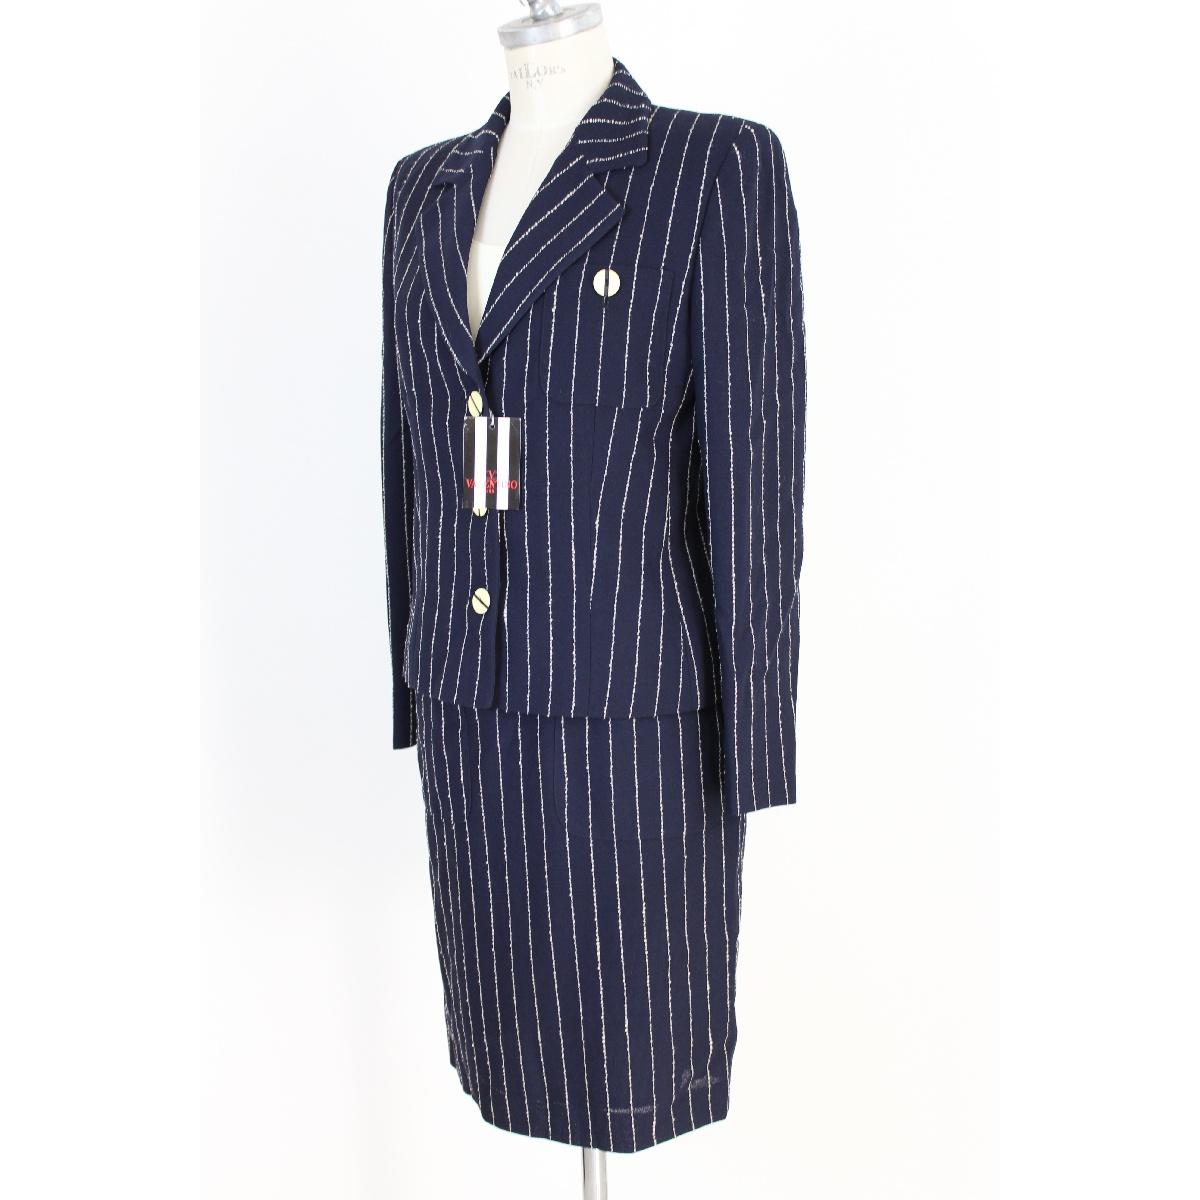 Valentino vintage 90s dress suit. Composed of a white and blue pinstripe sheath dress and a matching blue pinstripe jacket. Precious wool composition, fully lined. Elegant vintage evening dress, for formal events or ceremonies. Made in Italy, new